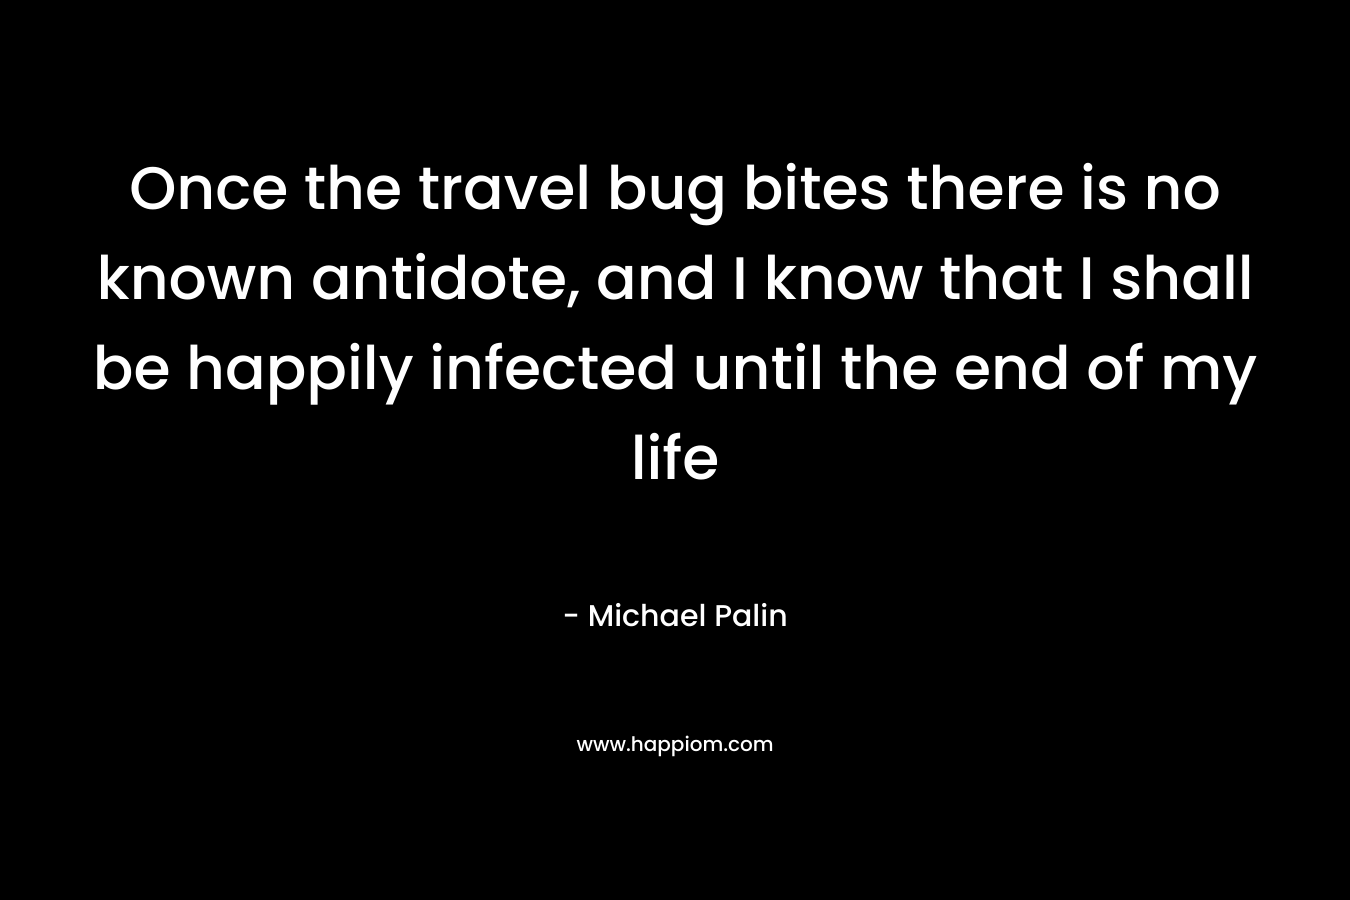 Once the travel bug bites there is no known antidote, and I know that I shall be happily infected until the end of my life – Michael Palin